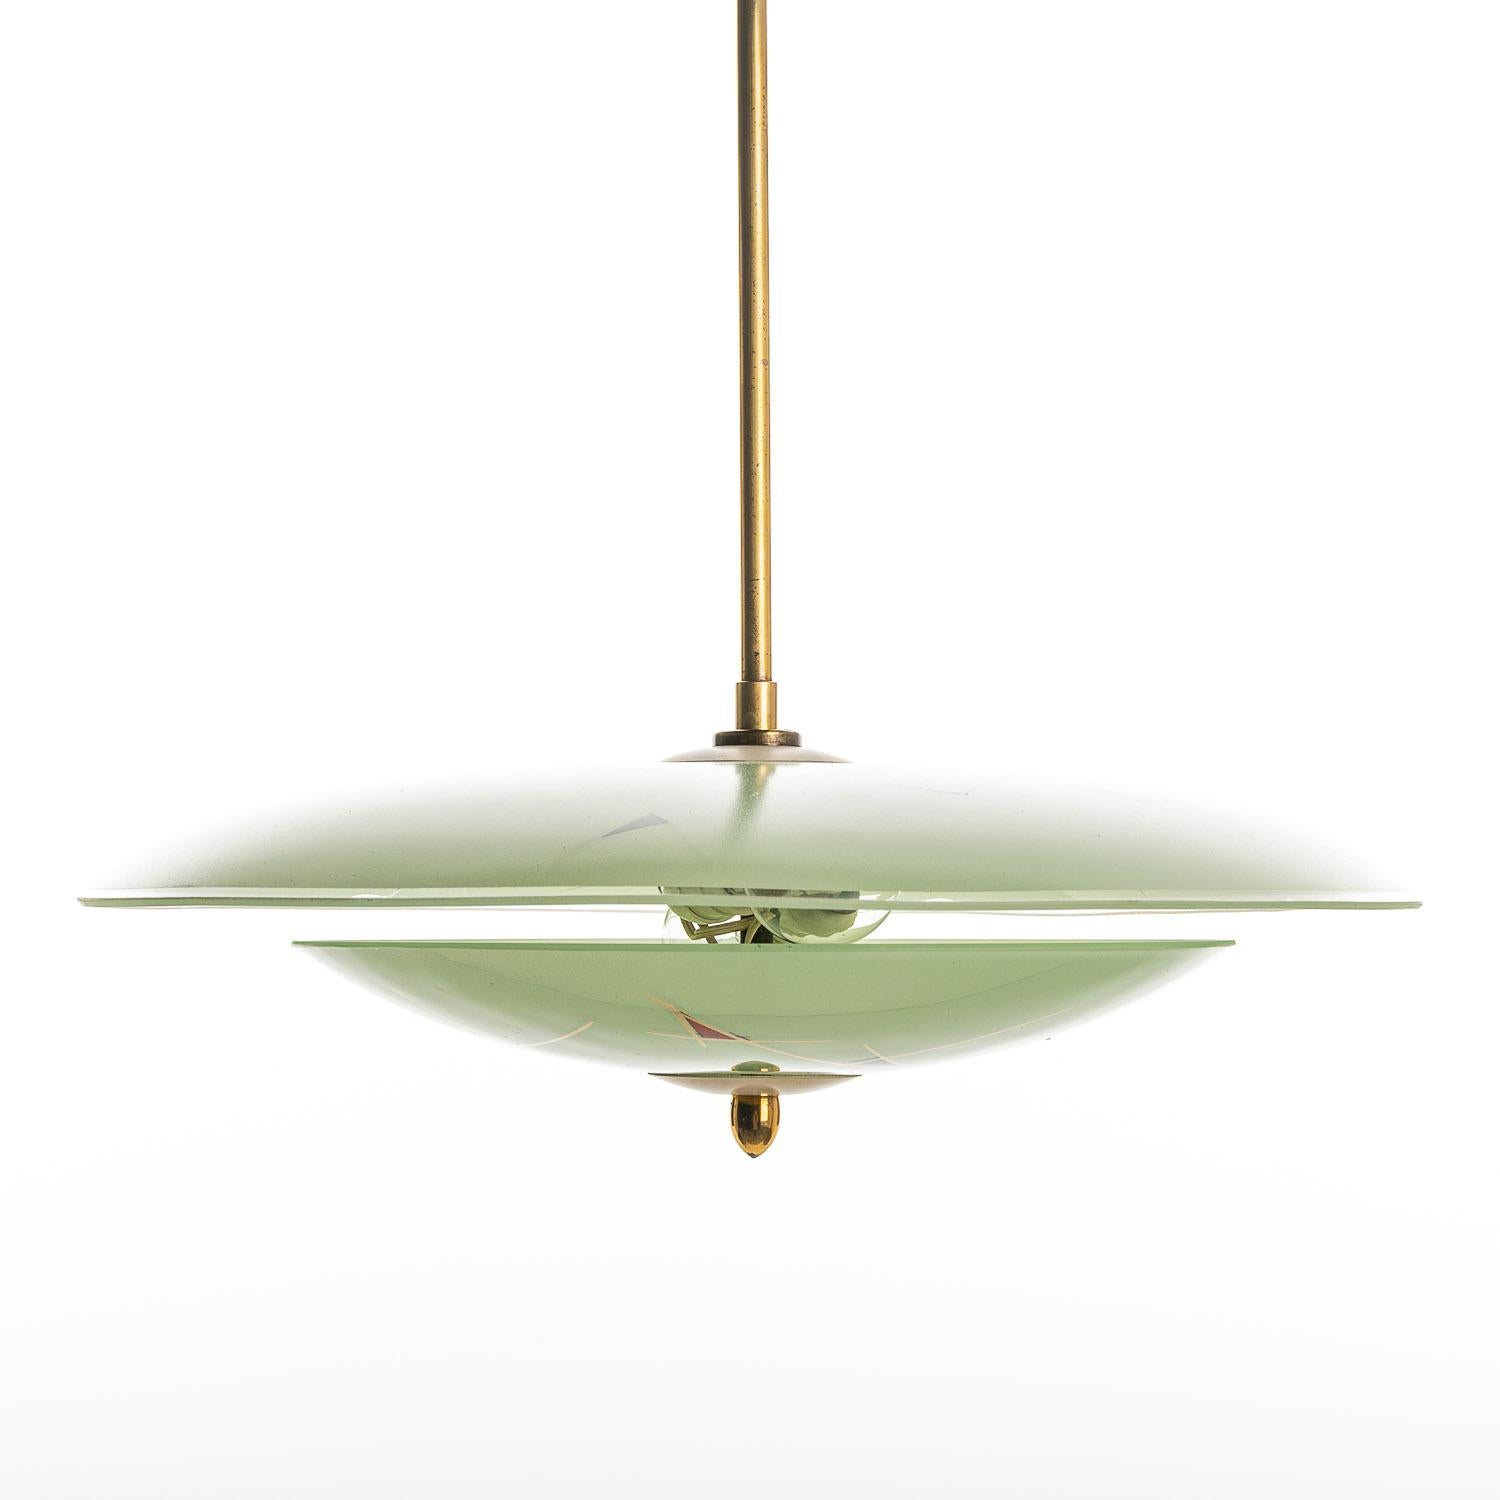 This '50s-era light comprises two saucers with a unique design of intersecting gold lines. The complimentary green dishes make sure this eye-catching pattern is sure to stand out. The two E14 bulbs are connected to a solid brass collar to complete